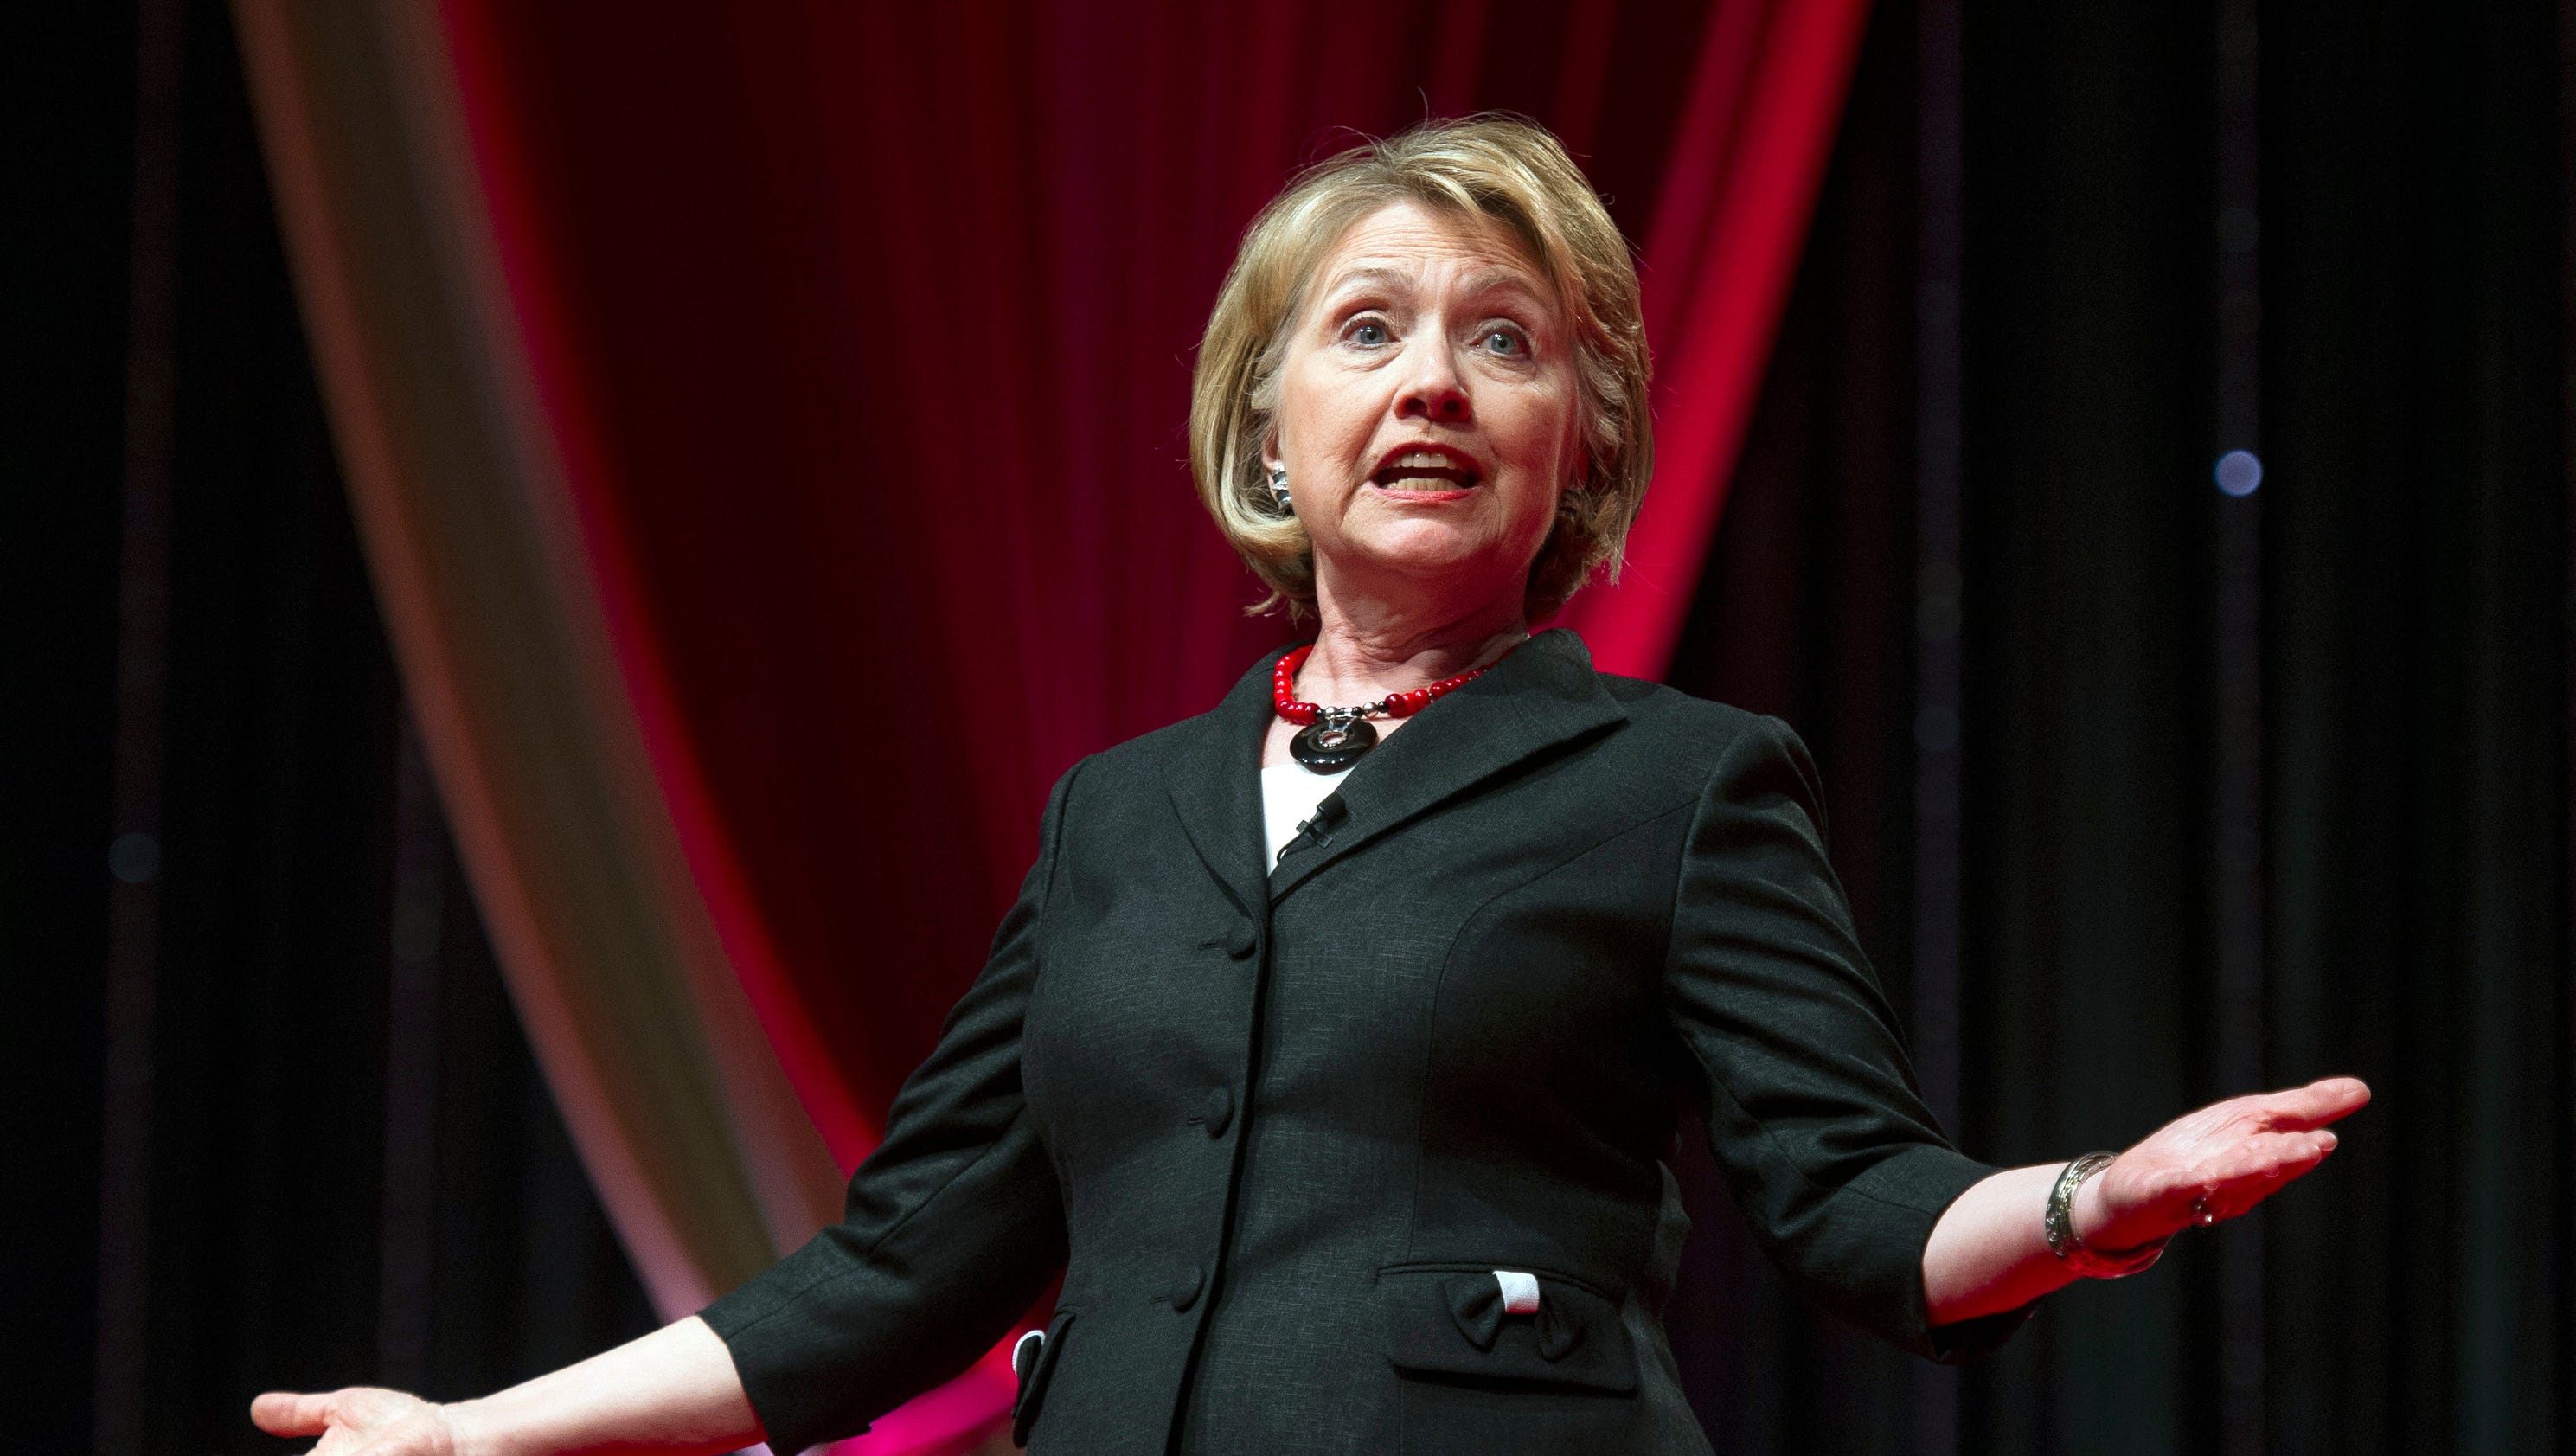 Clintons earn more than $25 million for recent speeches3200 x 1680